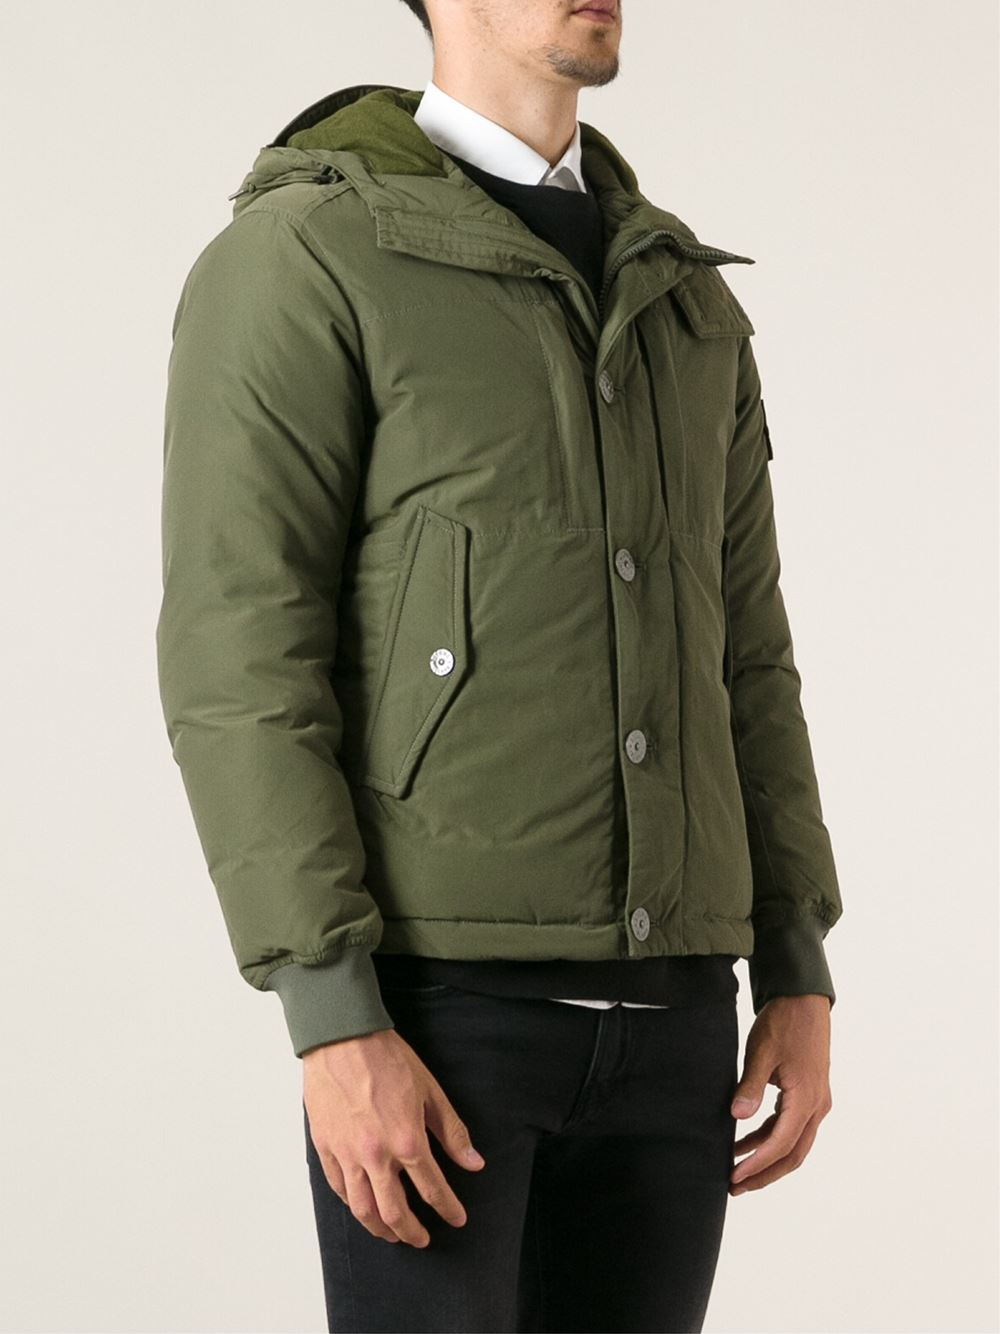 Stone Island Padded Military Coat in Green for Men - Lyst